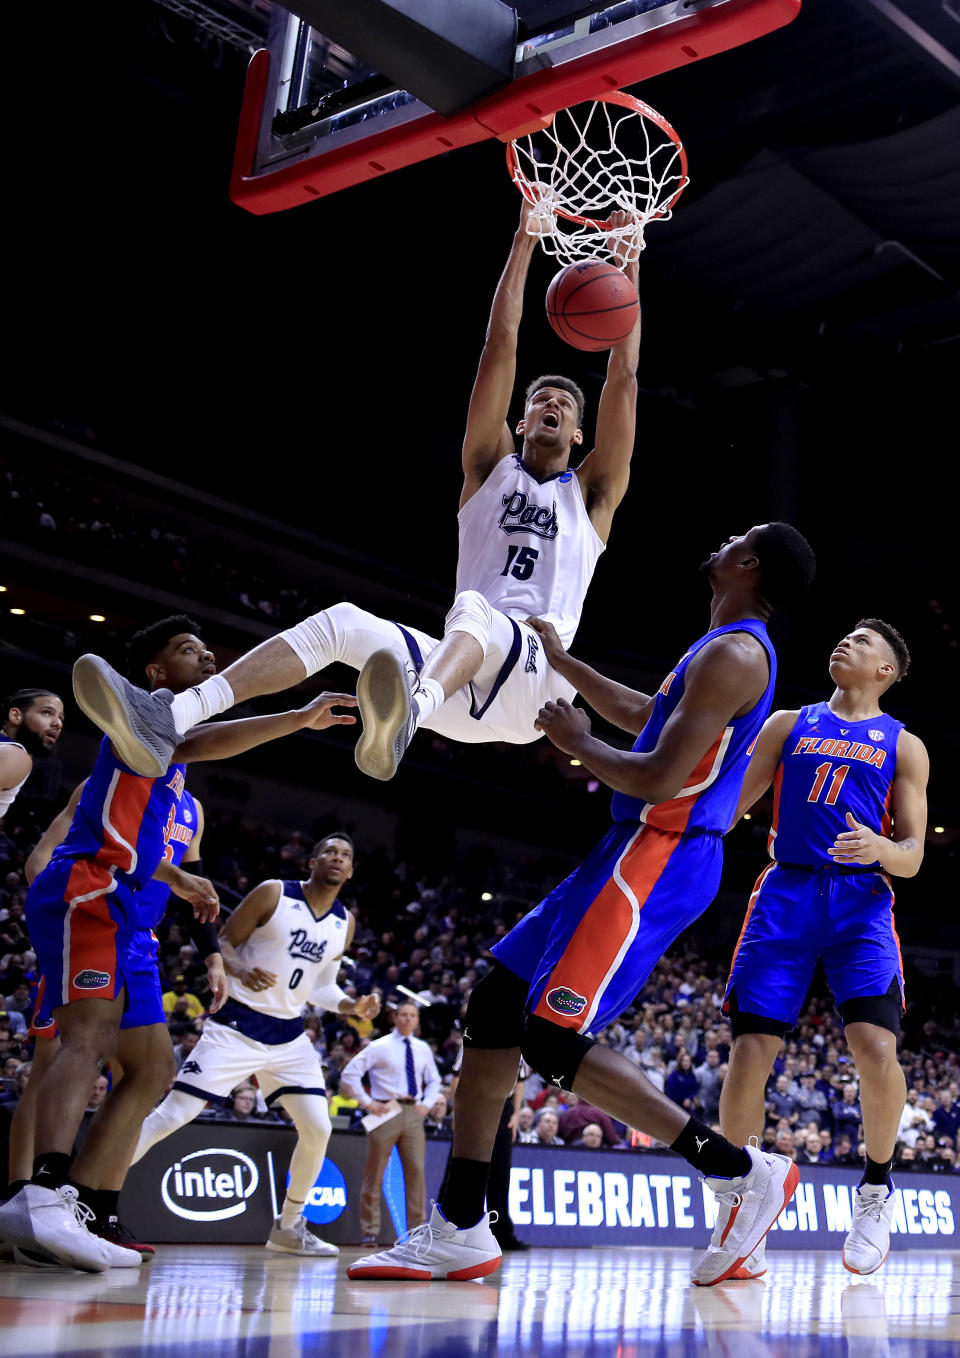 <p>Trey Porter #15 of the Nevada Wolf Pack dunks the ball against the Florida Gators in the first half during the first round of the 2019 NCAA Men’s Basketball Tournament at Wells Fargo Arena on March 21, 2019 in Des Moines, Iowa. </p>